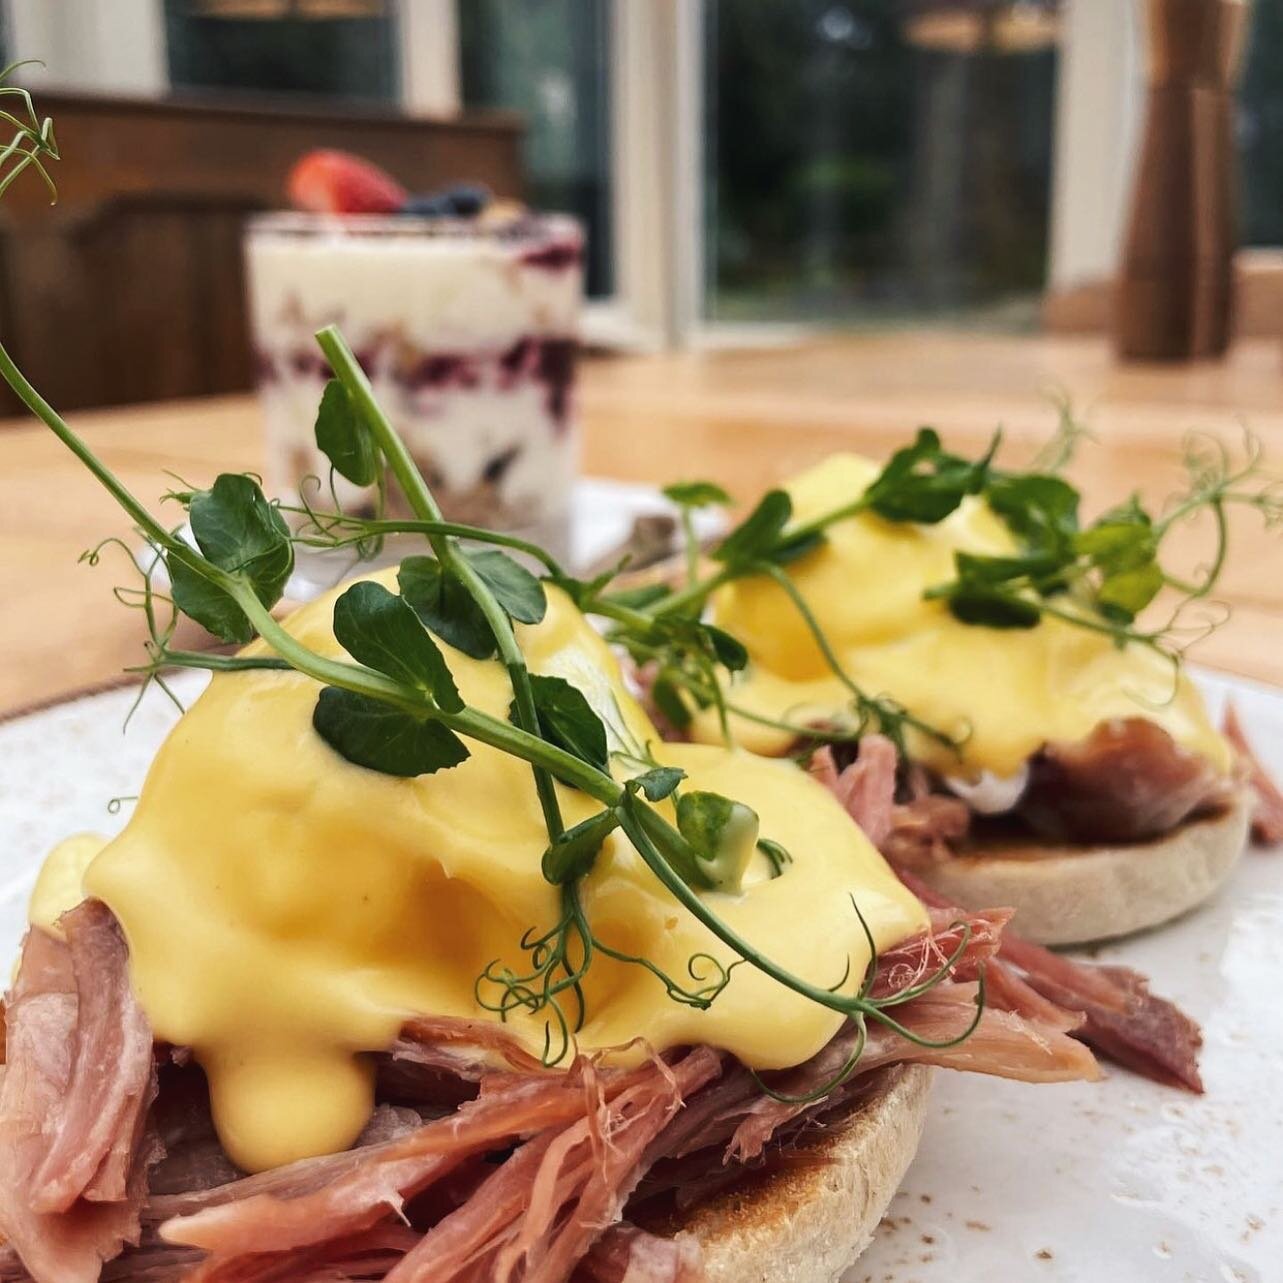 ʙʀᴇᴀᴋғᴀsᴛ ɪs sᴇʀᴠᴇᴅ. 

We are open all bank holiday weekend serving up lots of your favourites. Including our delicious Eggs Benedict&hellip; yum! 🍳🍳
.
.
.
.
.
#wyresdale #wyresdalepark #applestore #applestorecafe #cafe #breakfast #brunch #yum #del